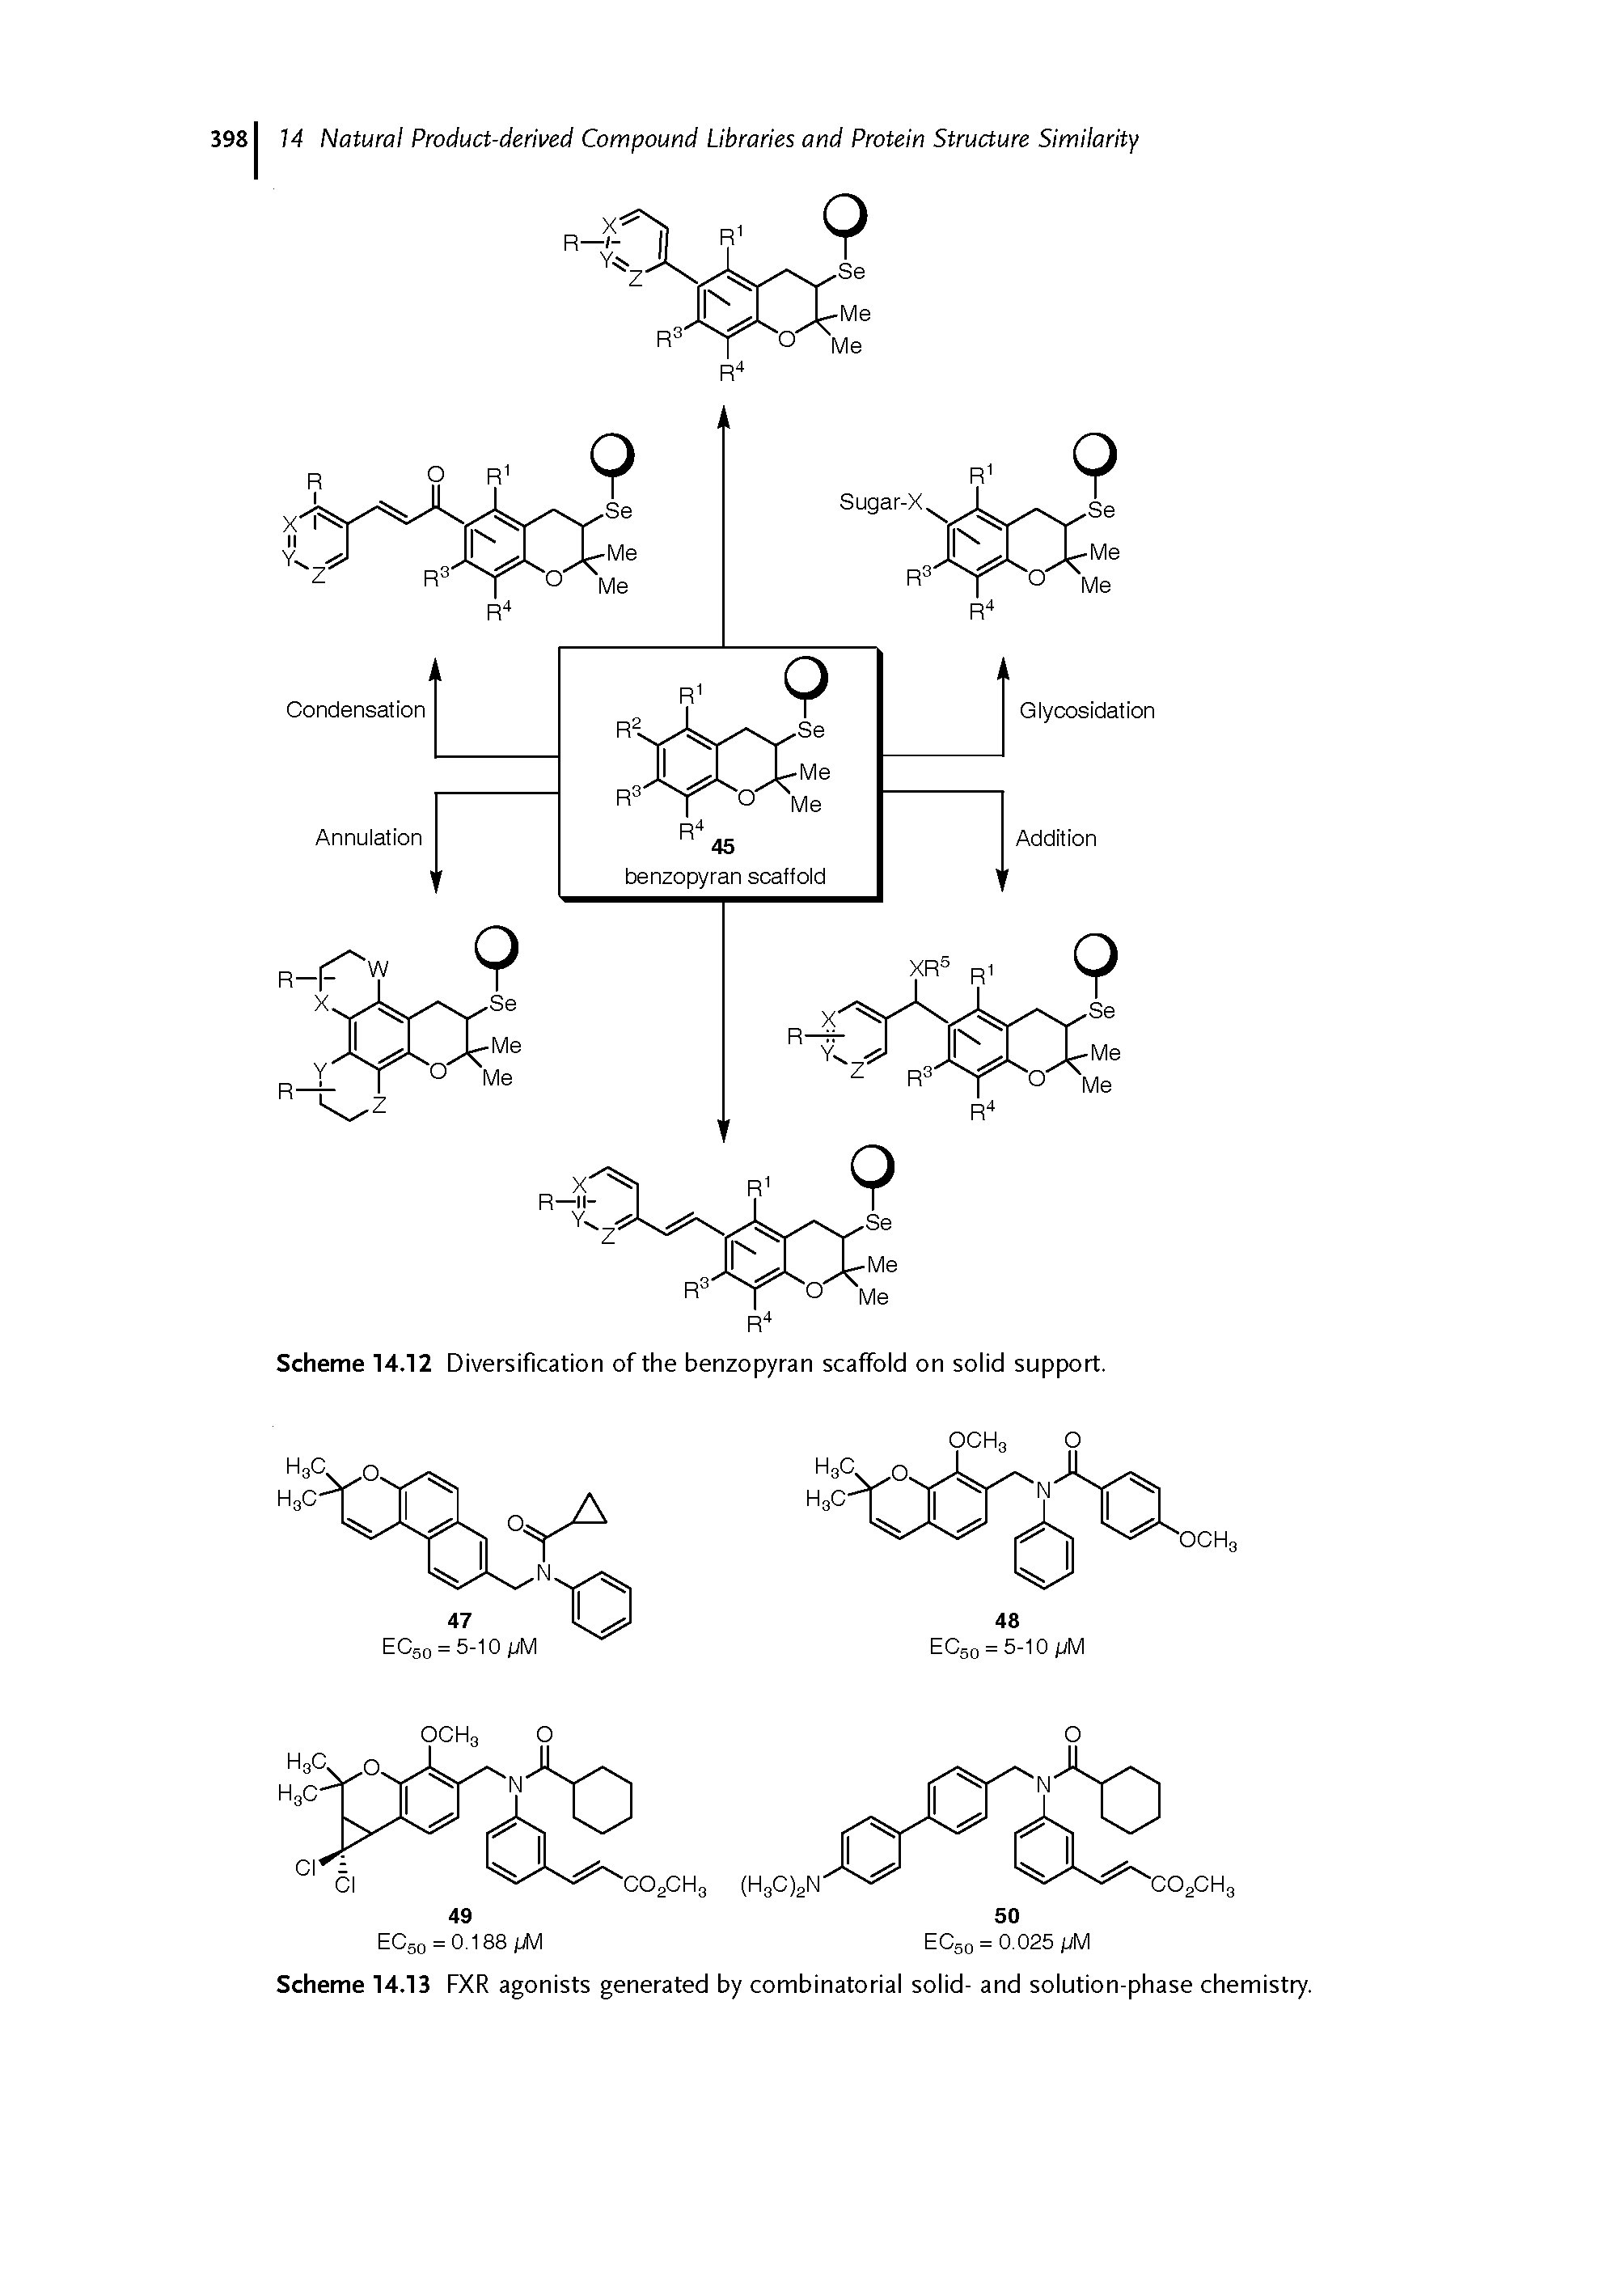 Scheme 14.13 FXR agonists generated by combinatorial solid- and solution-phase chemistry.